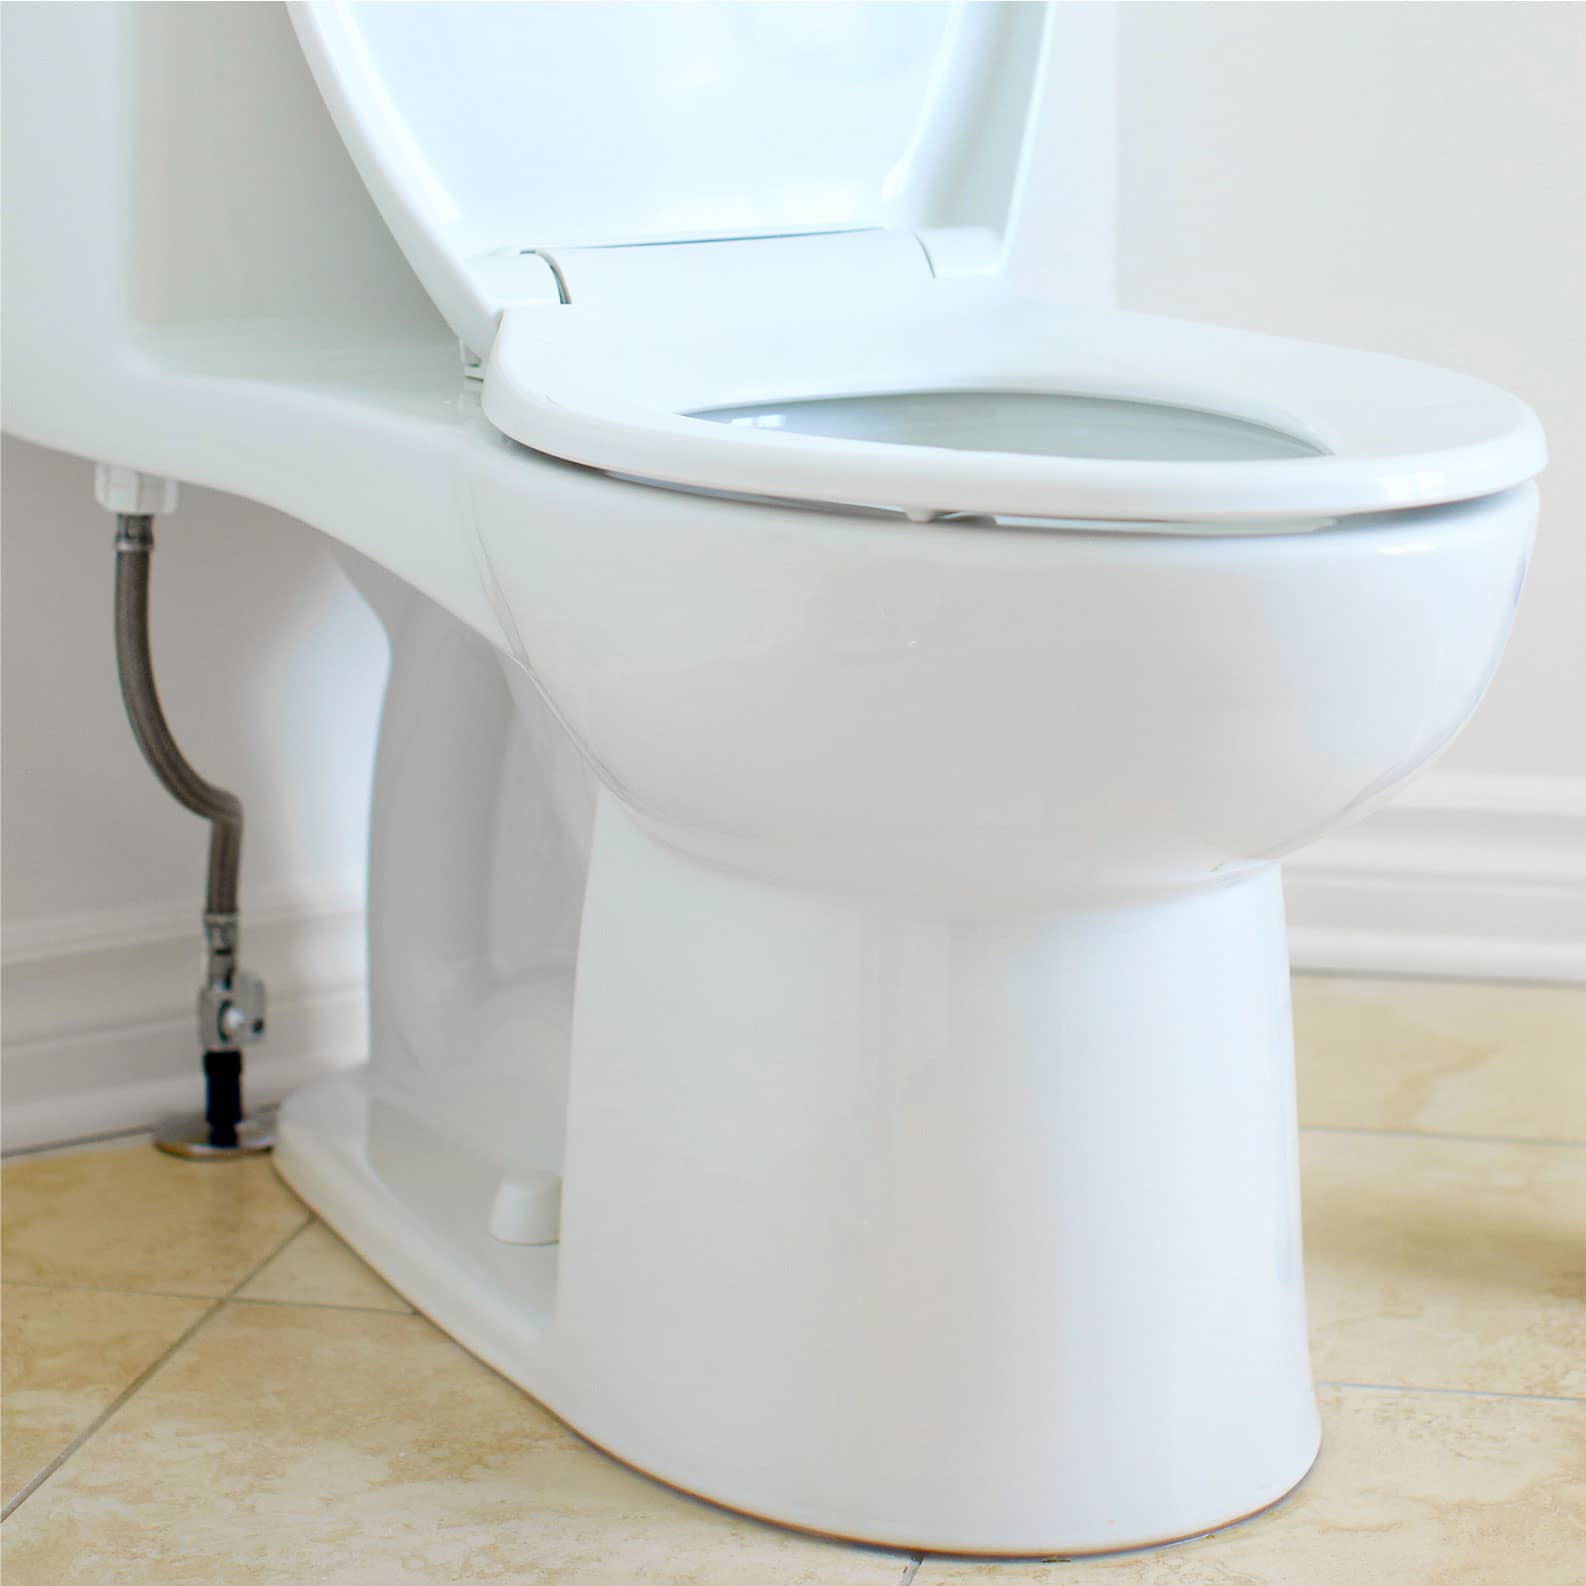 Low Flow Toilets Will Save Water And Money Weltman Home Services